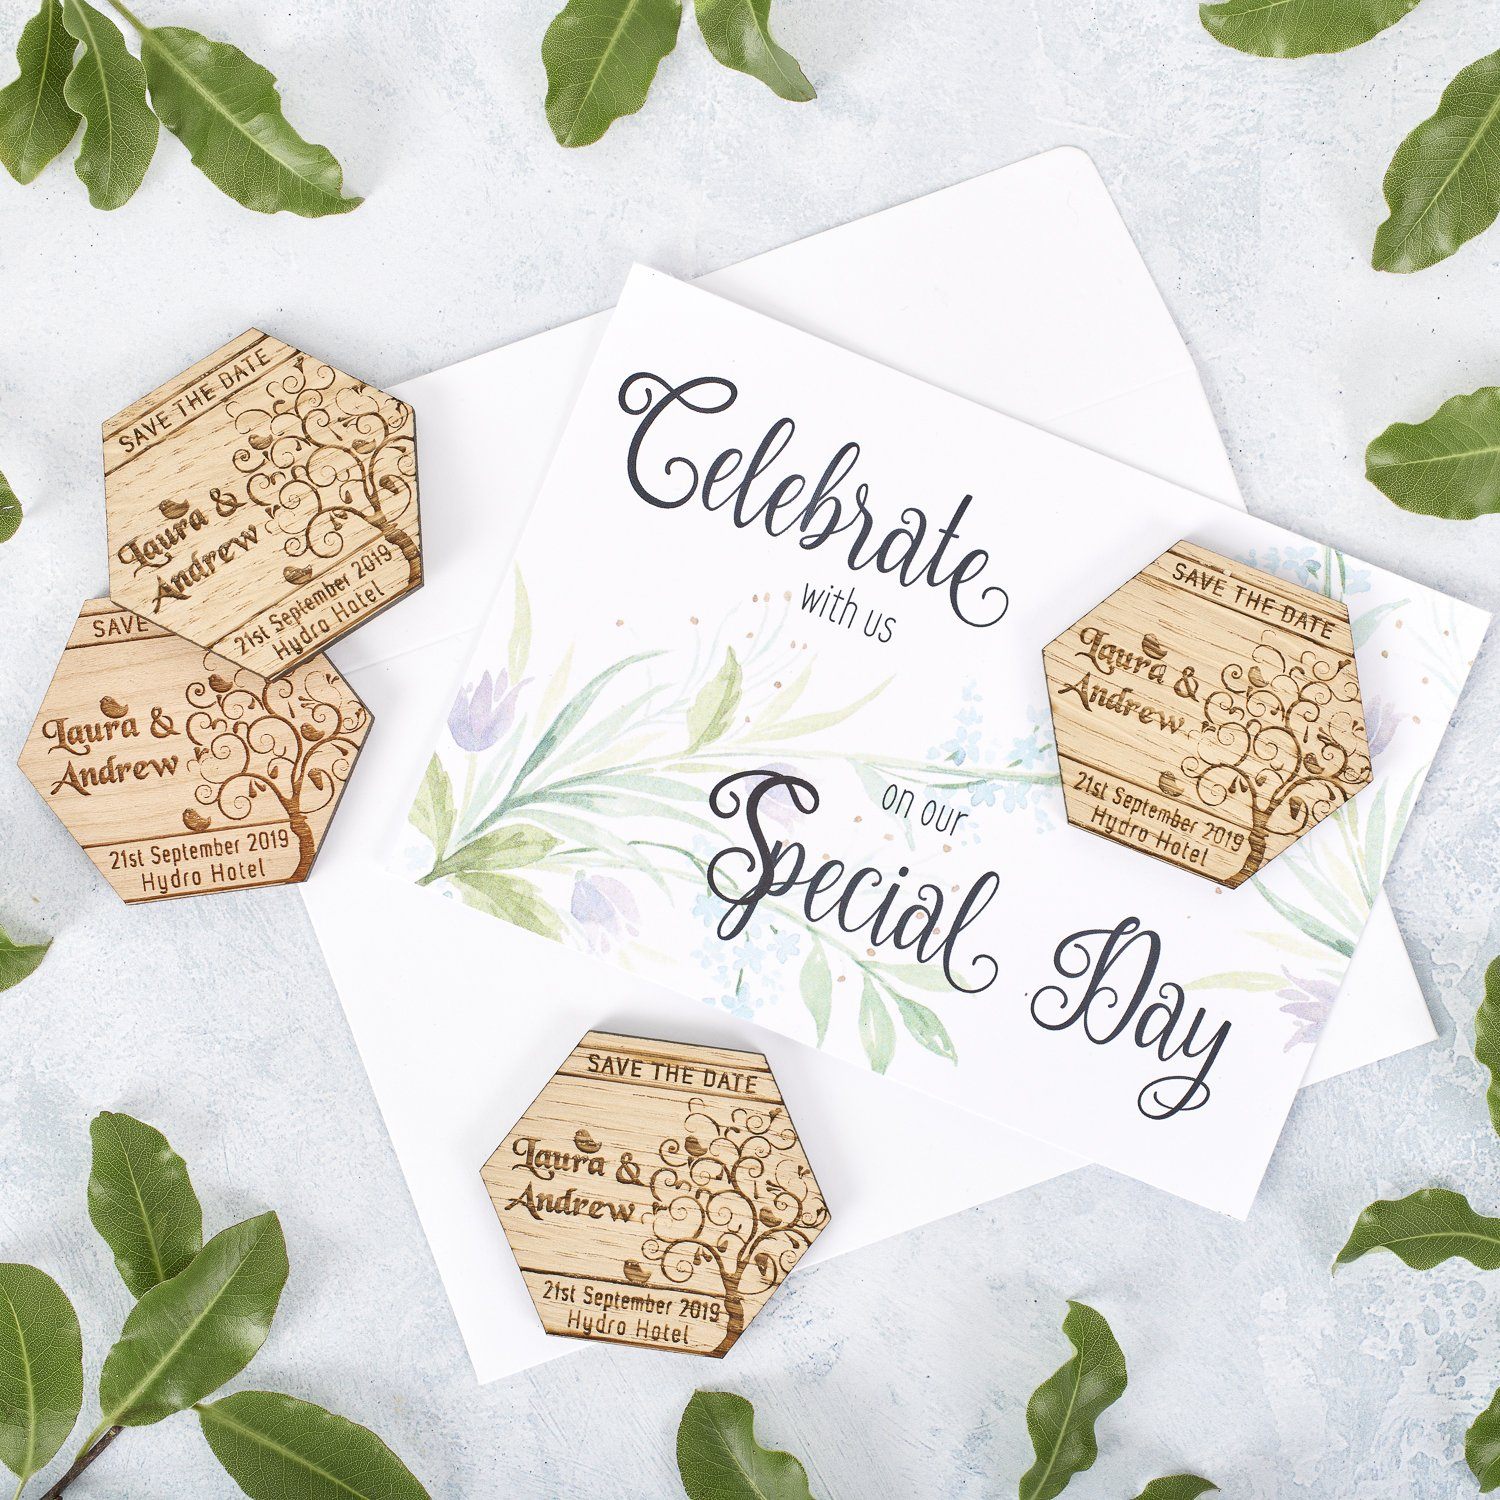 Save The Date Magnet With Cards - Save The Date Magnet Wooden Rustic & Cards - Hexagon